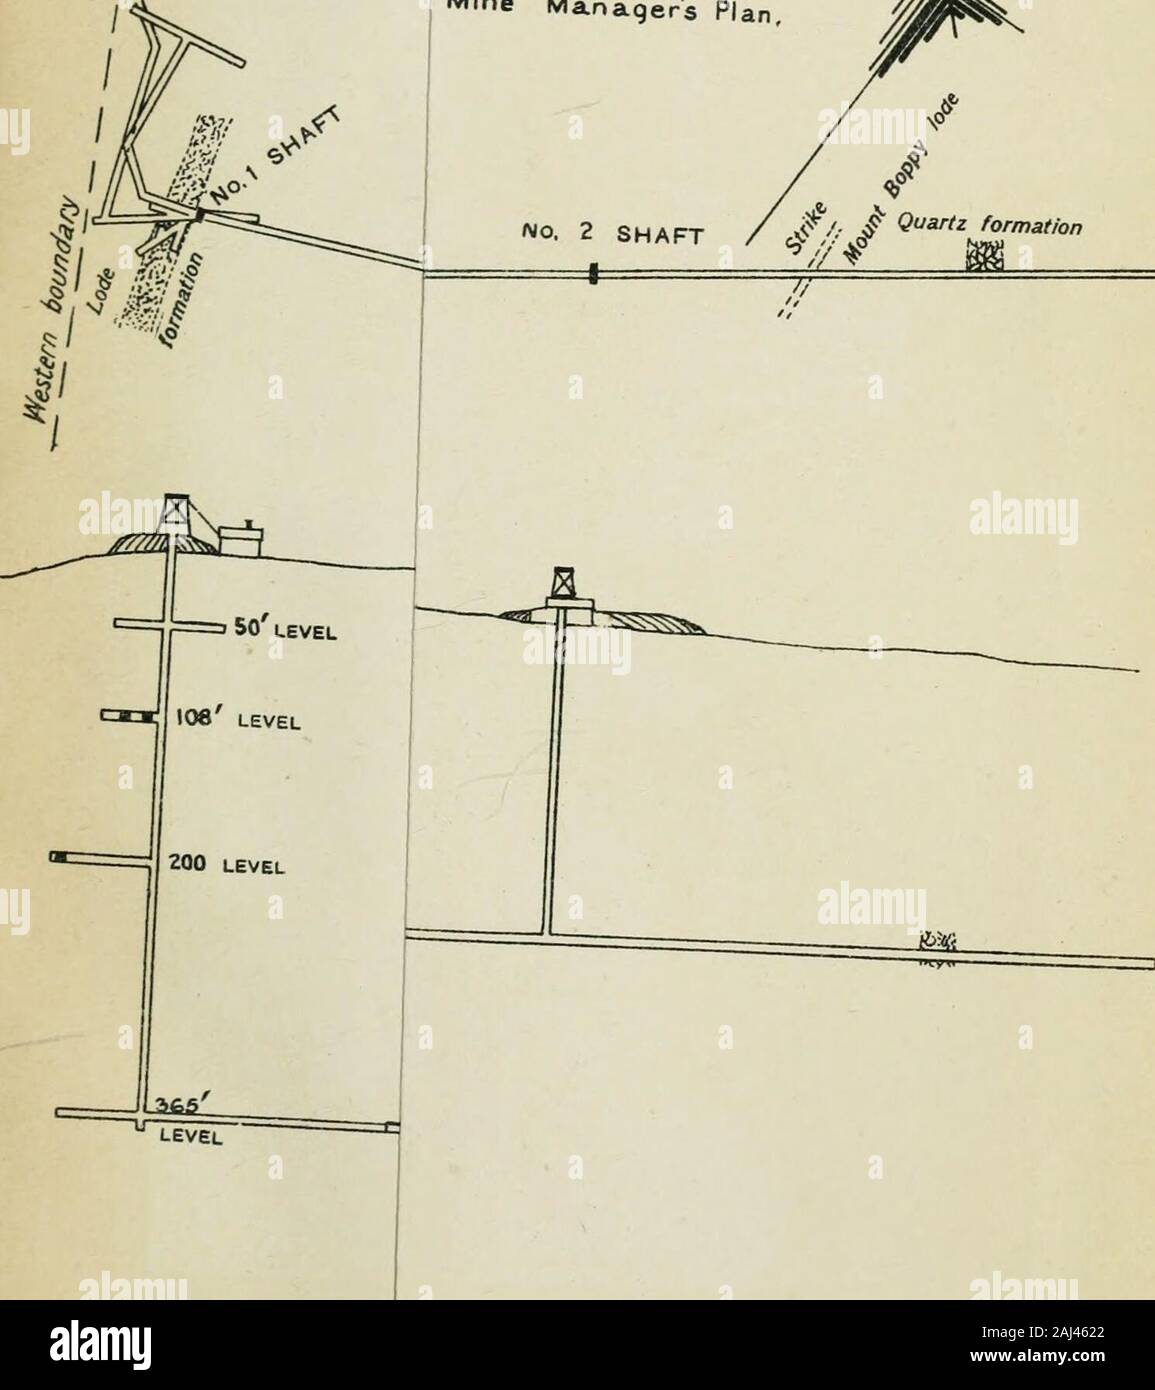 Mineral resources . Mine Managers Plan, No. 2 SHAFT / (ftJrQuarU%%matl0n. 1* it NORTH MOUNT BOPPY C.M.C9 PLAN OF WORKINGS Scale 1 92 22 2° Feet Taken from Mine Managers Plan no. 2 SHAFT / &/fJ Stock Photo